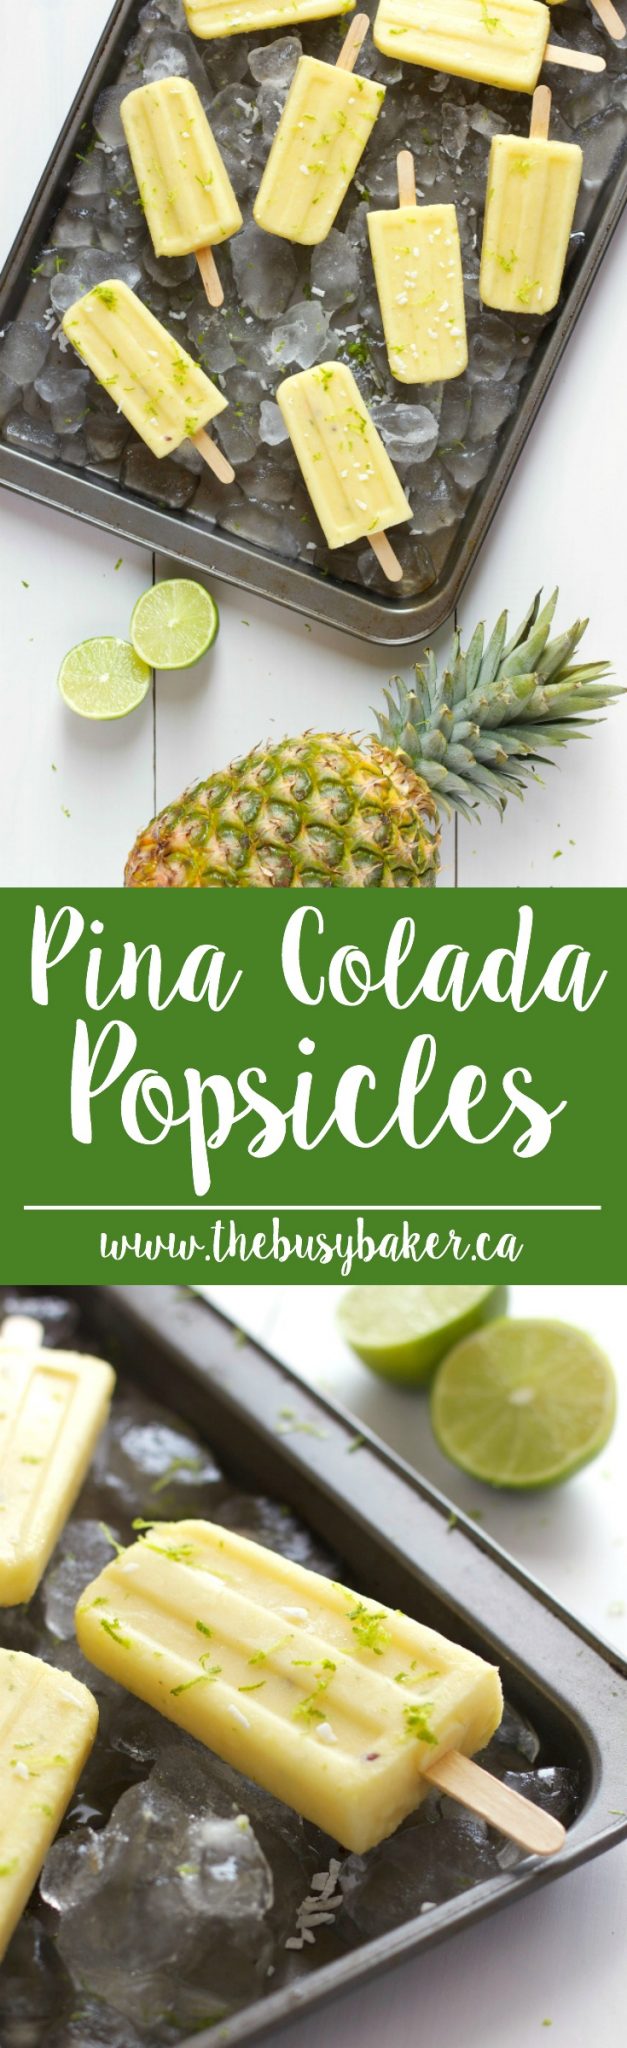 These Pina Colada Popsicles are a refreshing summer treat inspired by the tropical cocktail, and they're packed with fresh pineapple, coconut, and lime! Recipe from thebusybaker.ca! via @busybakerblog